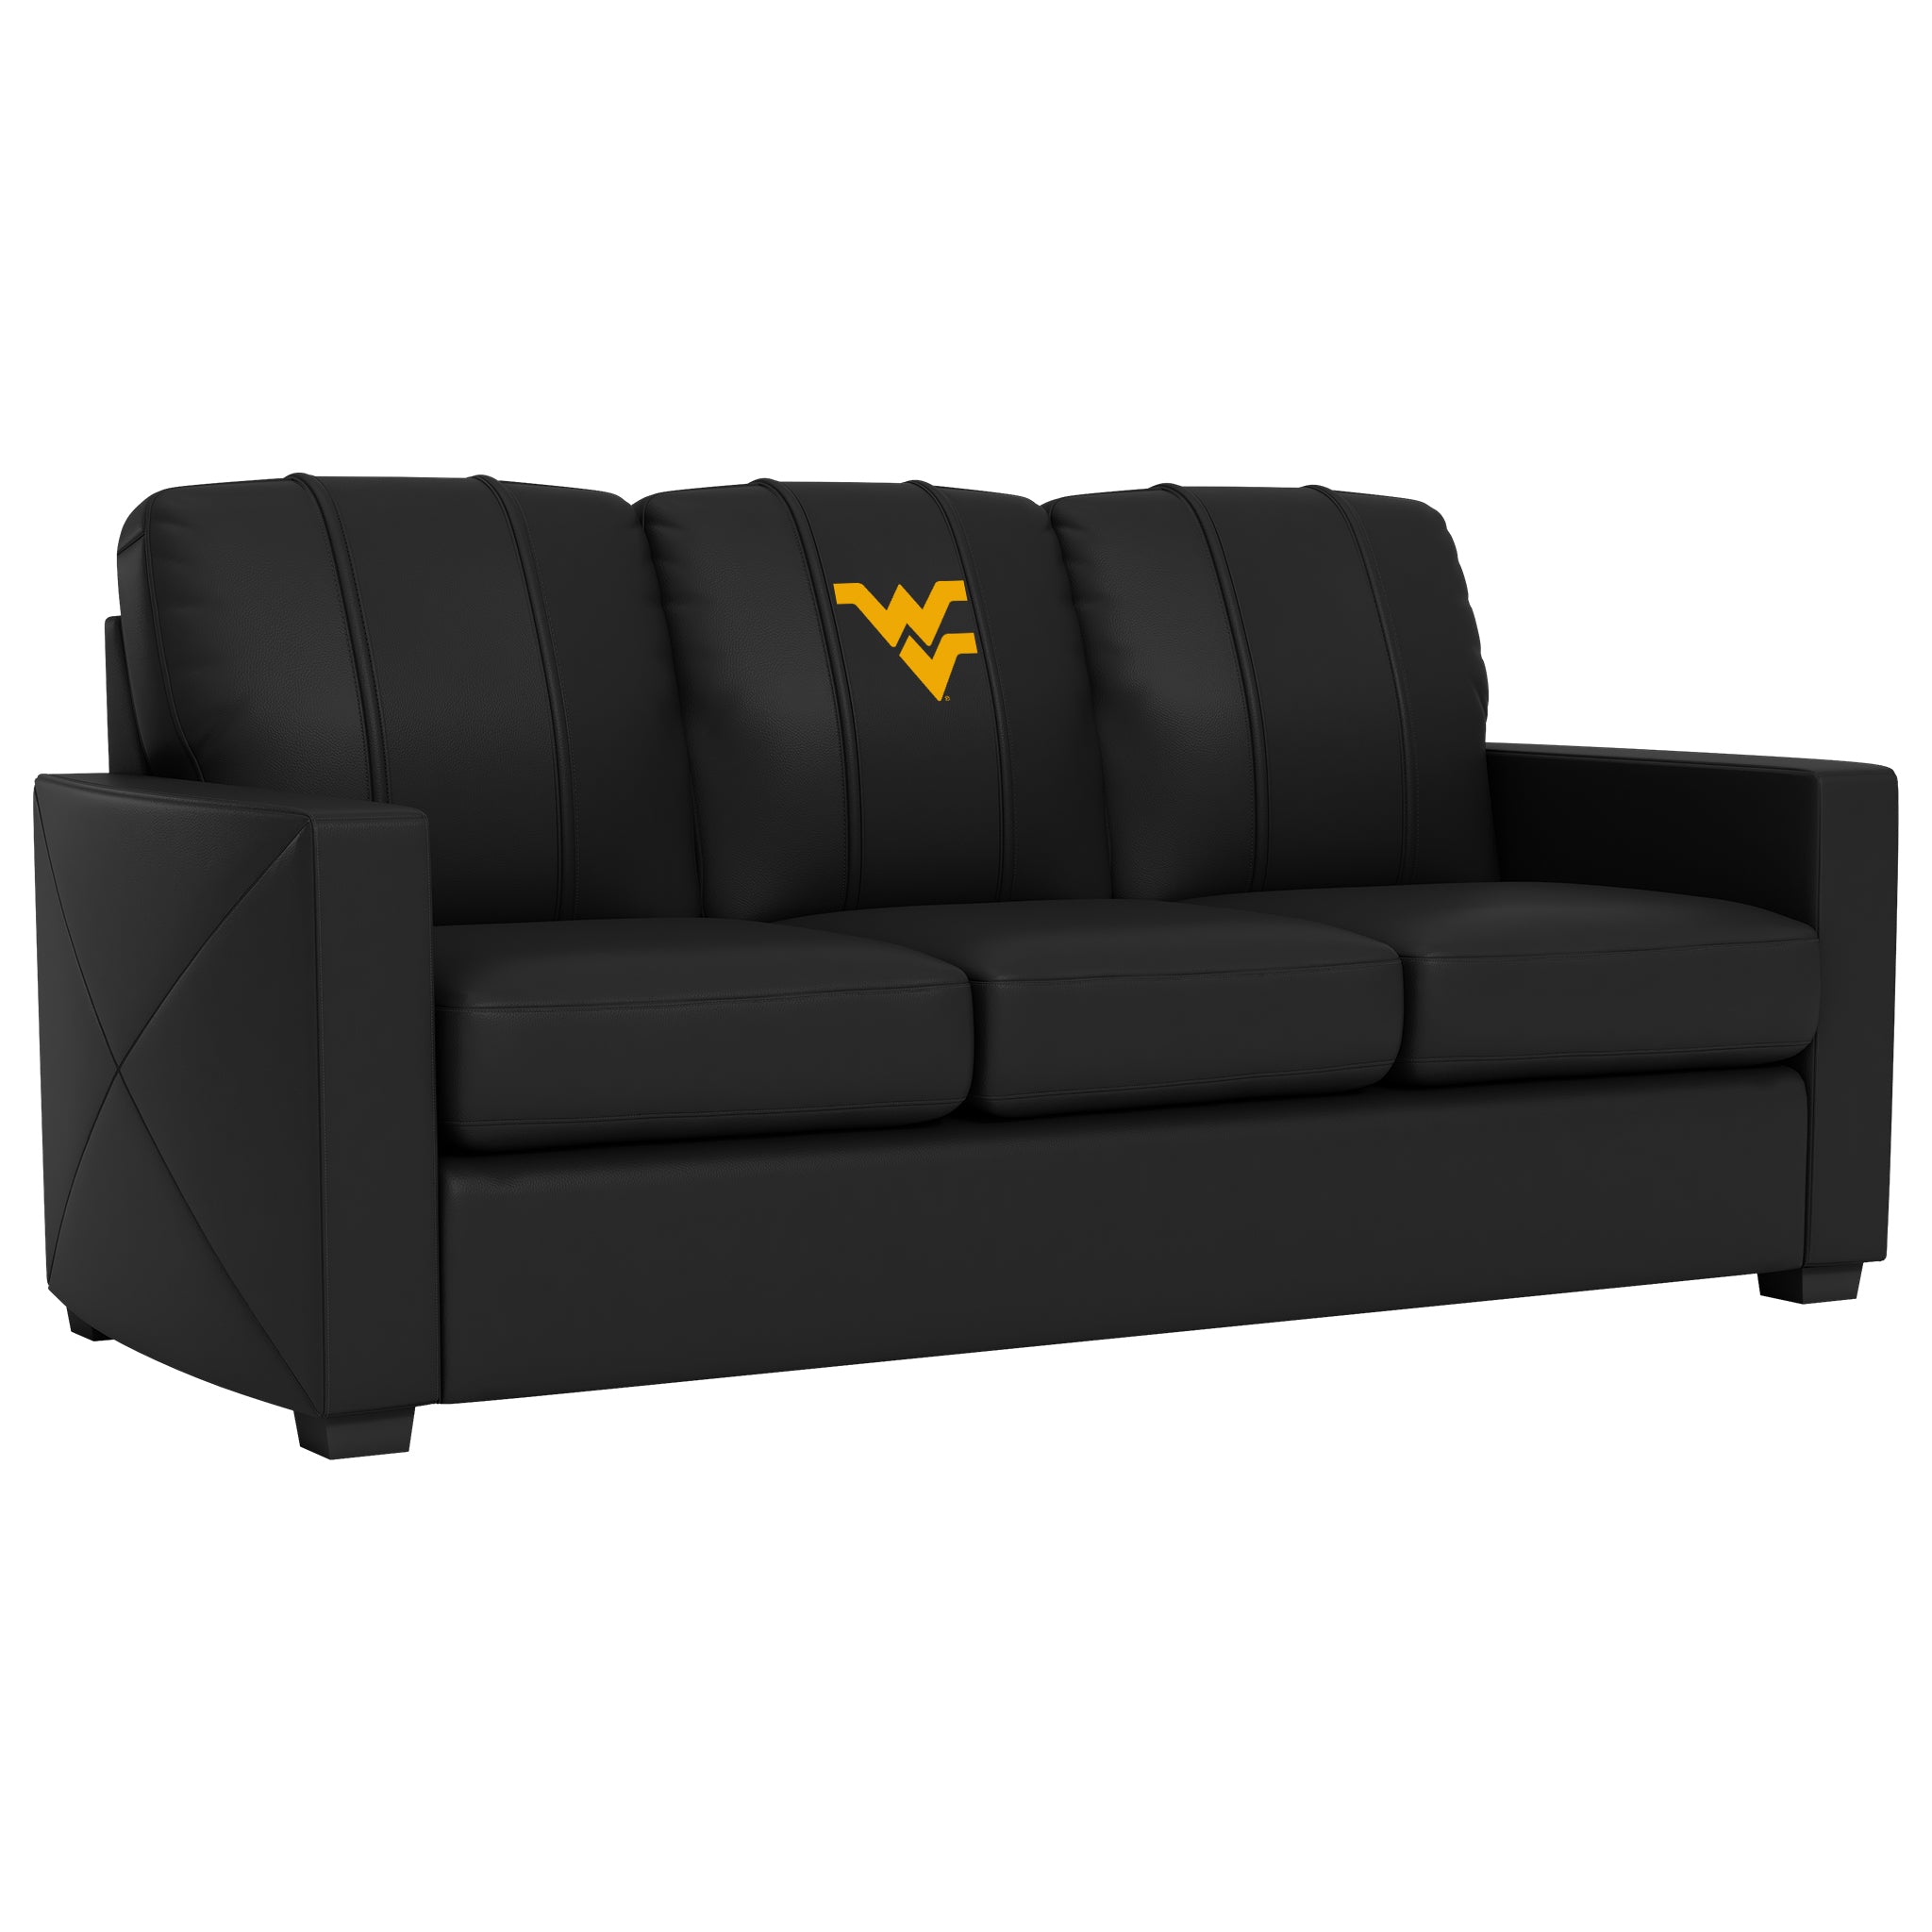 West Virginia Mountaineers Silver Sofa with West Virginia Mountaineers Logo